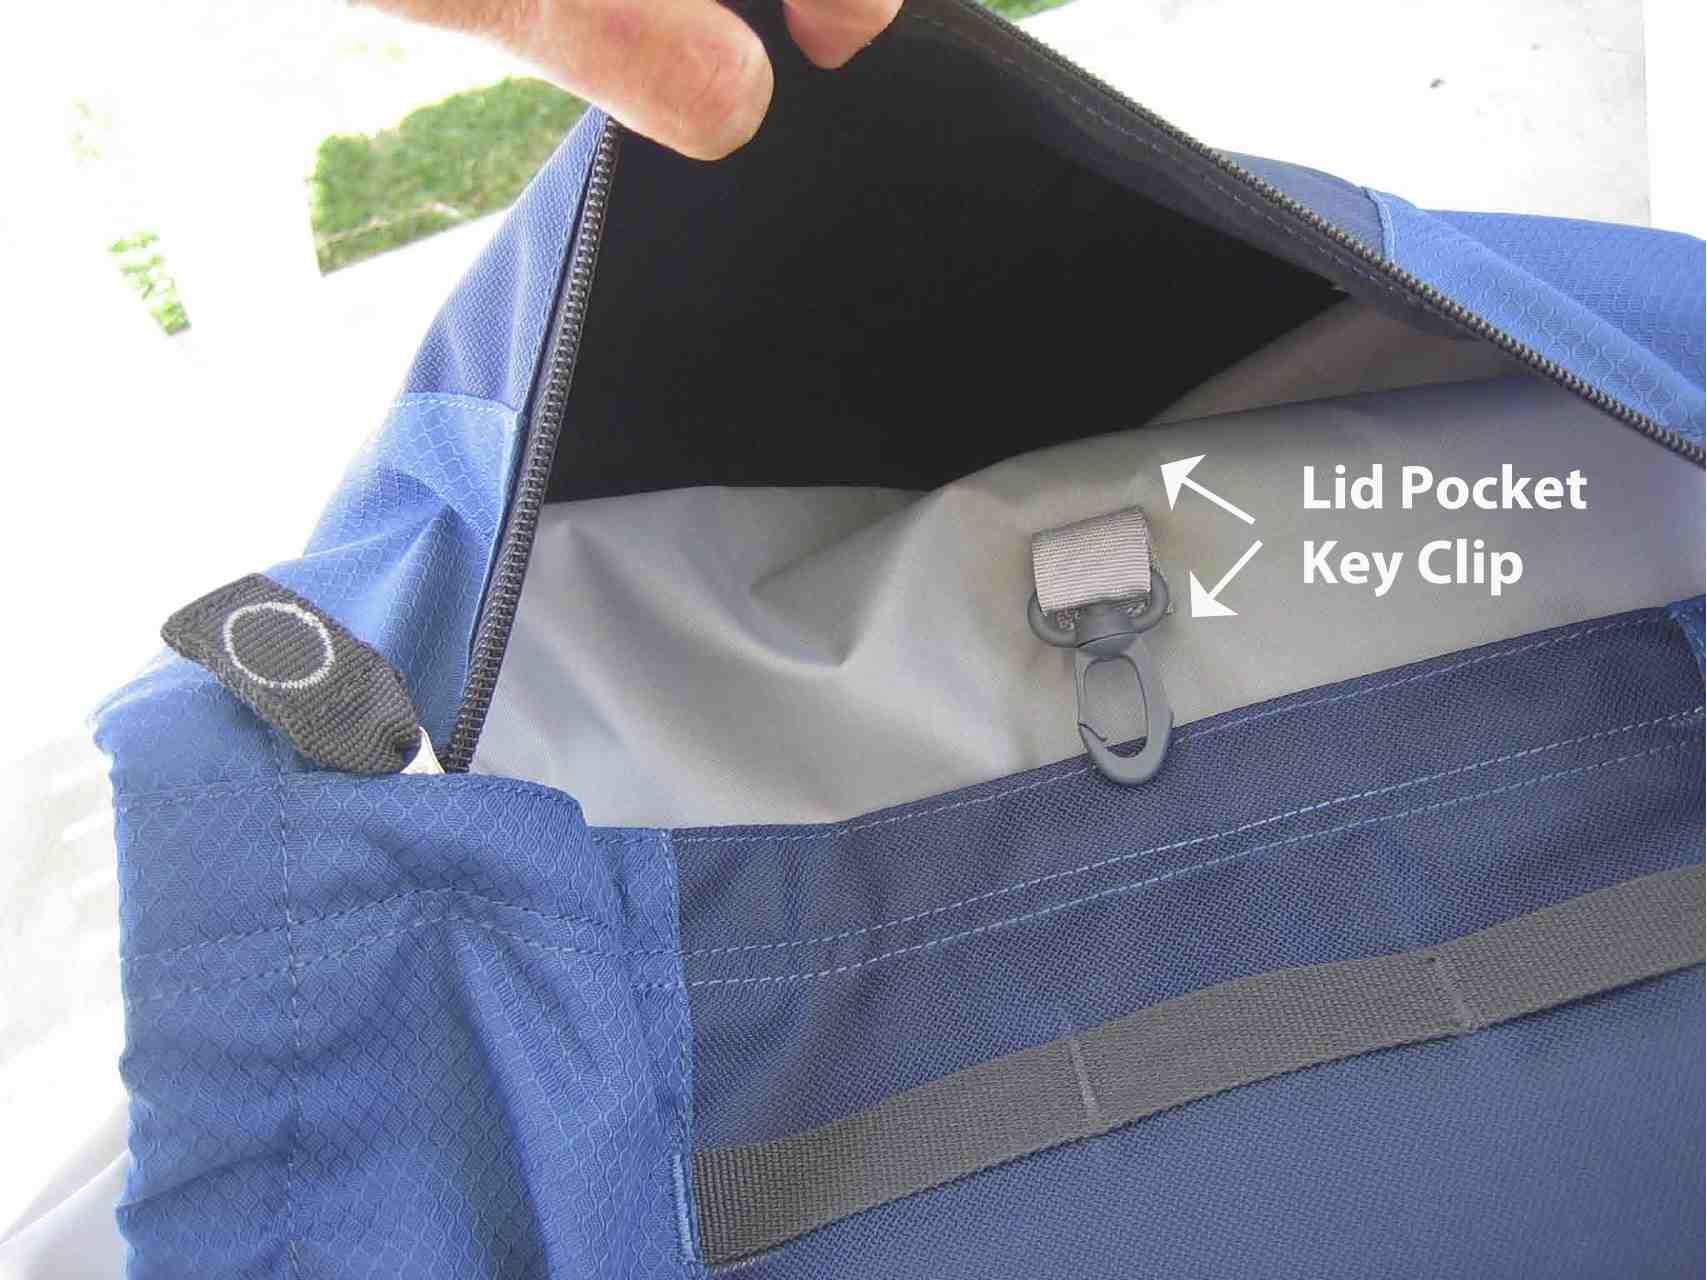 Lid pocket with key clip